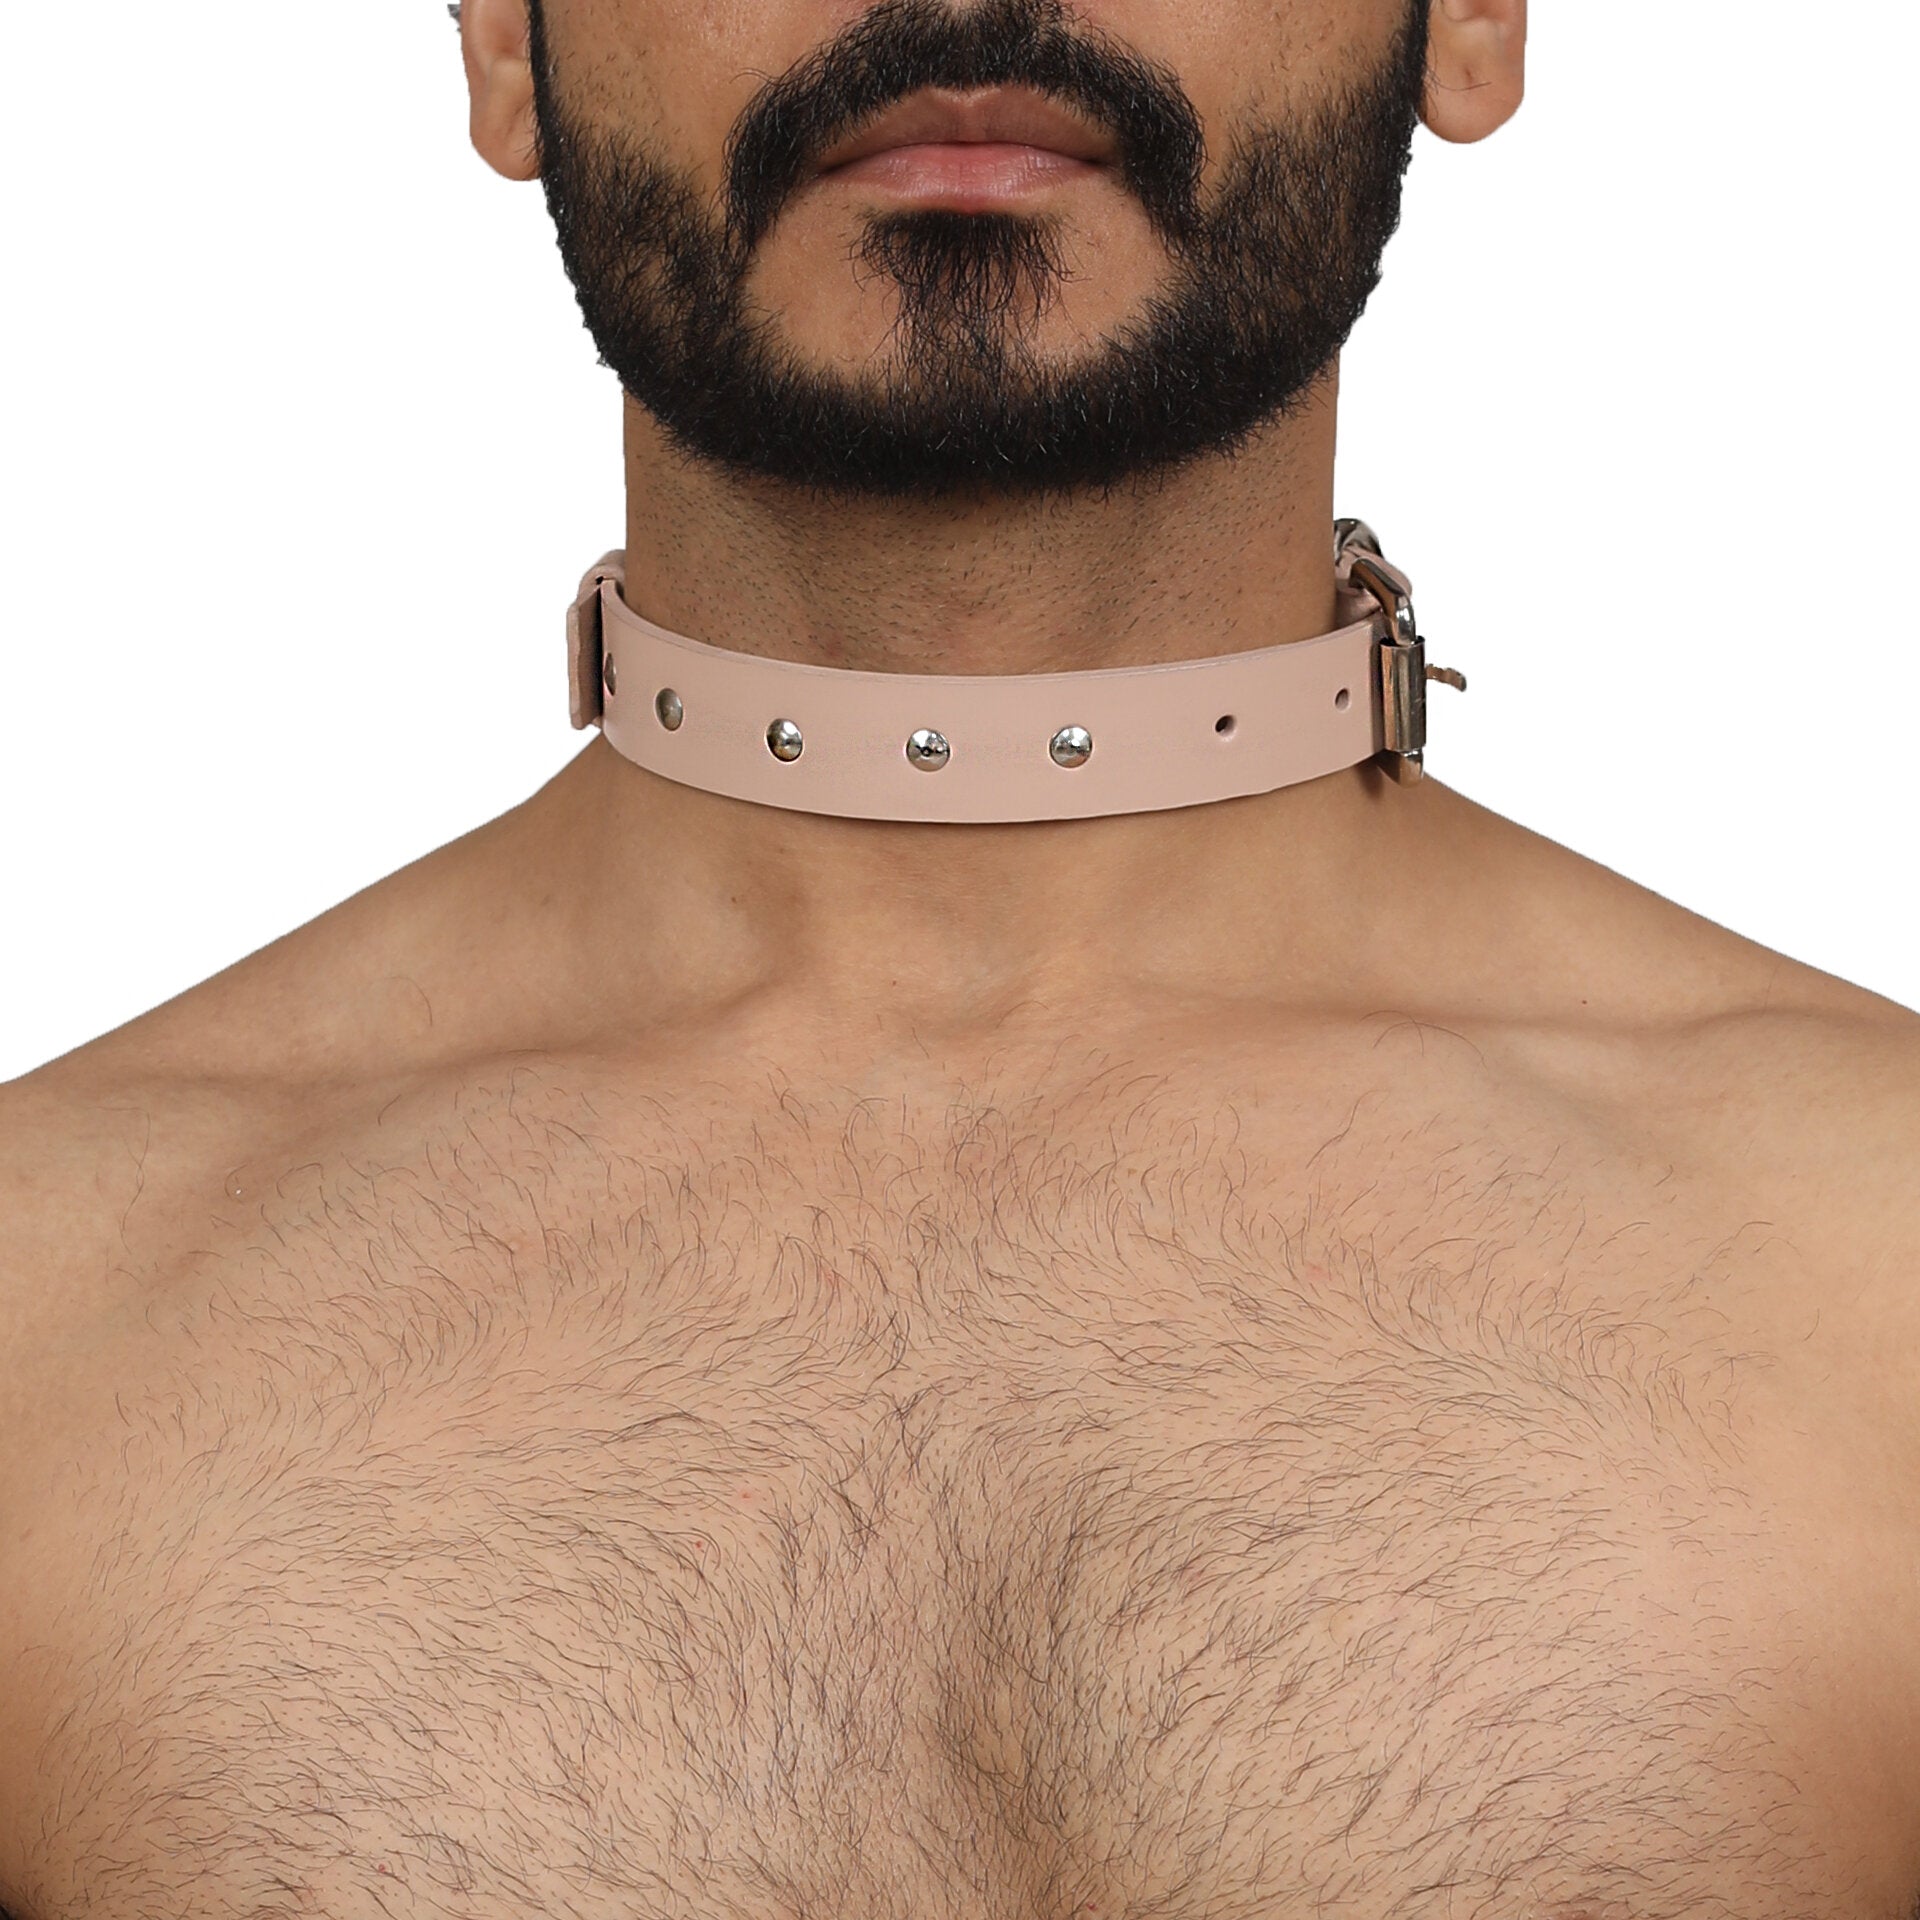 CLASSIC SUBMISSIVE CHOKER - Subculture